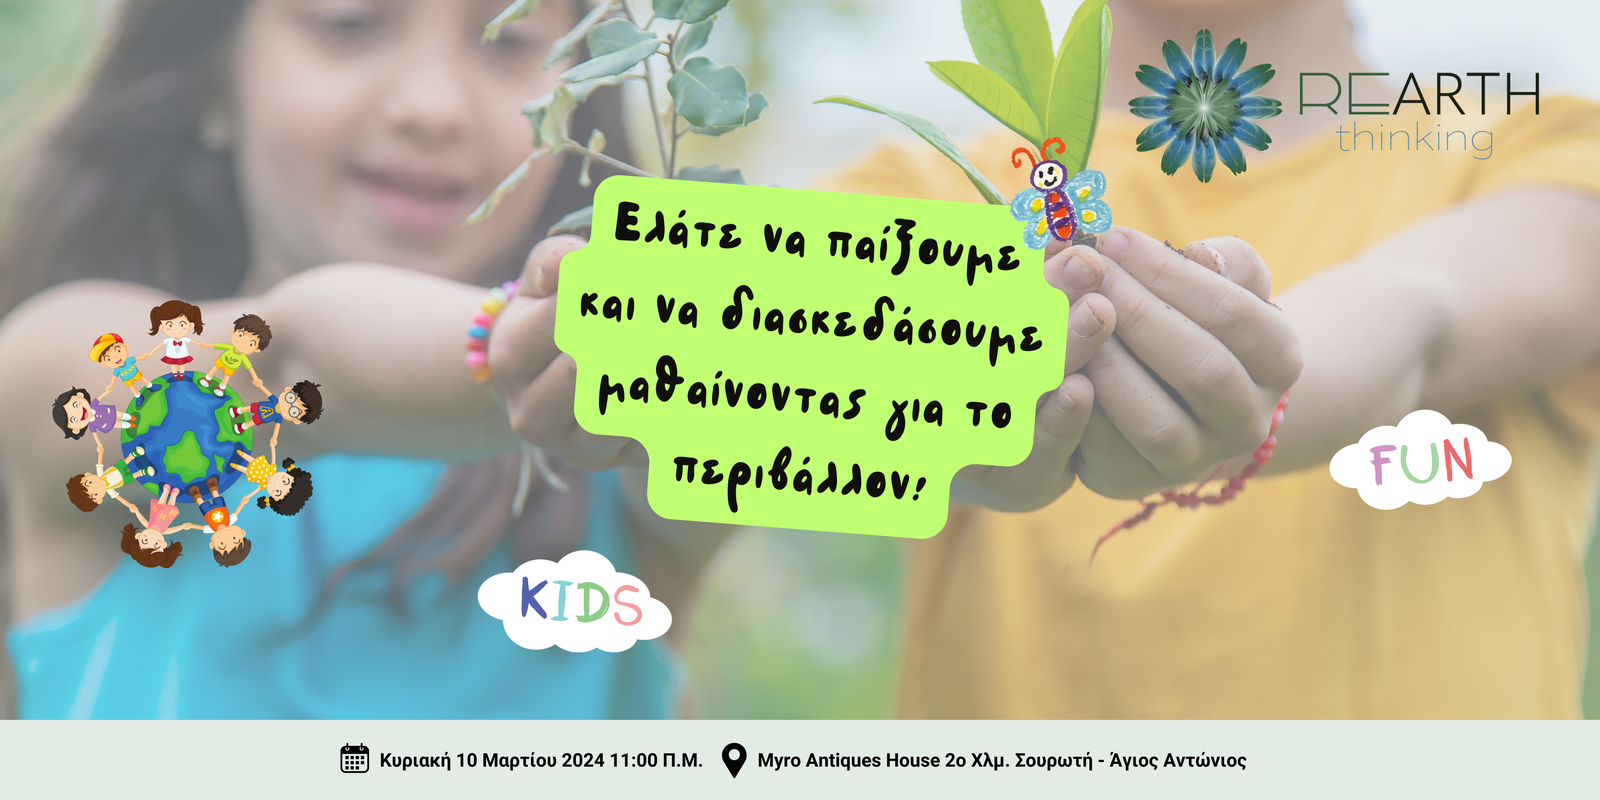 Event Invitation with 2 Eco Kids Holding Small Plants